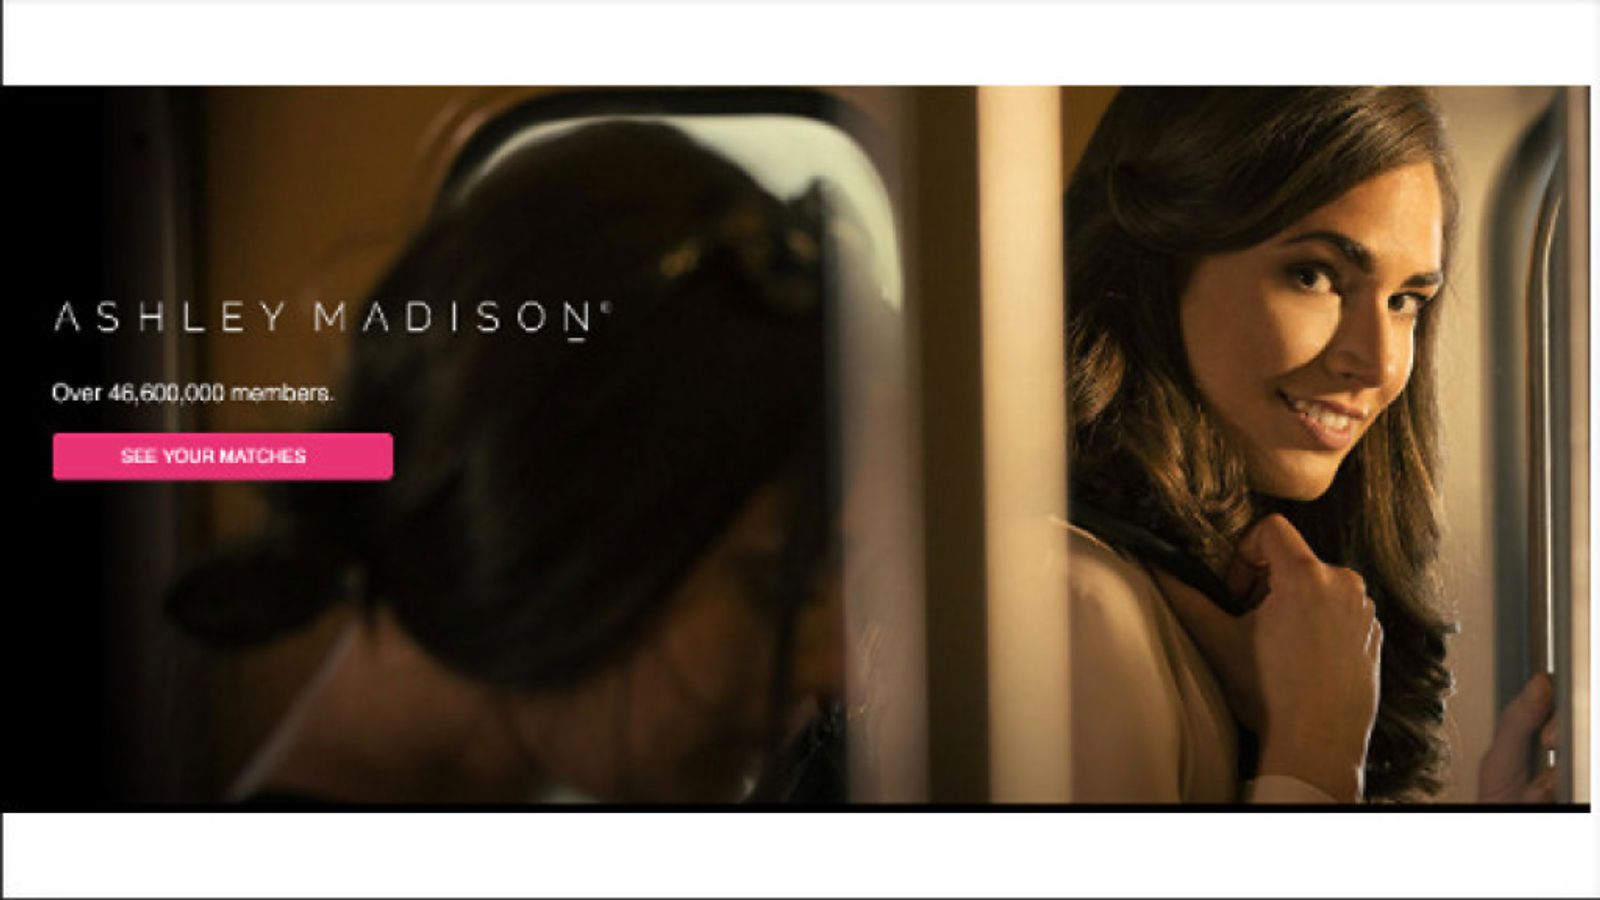 AshleyMadison.com Settles FTC, State Charges From 2015 Data Breach